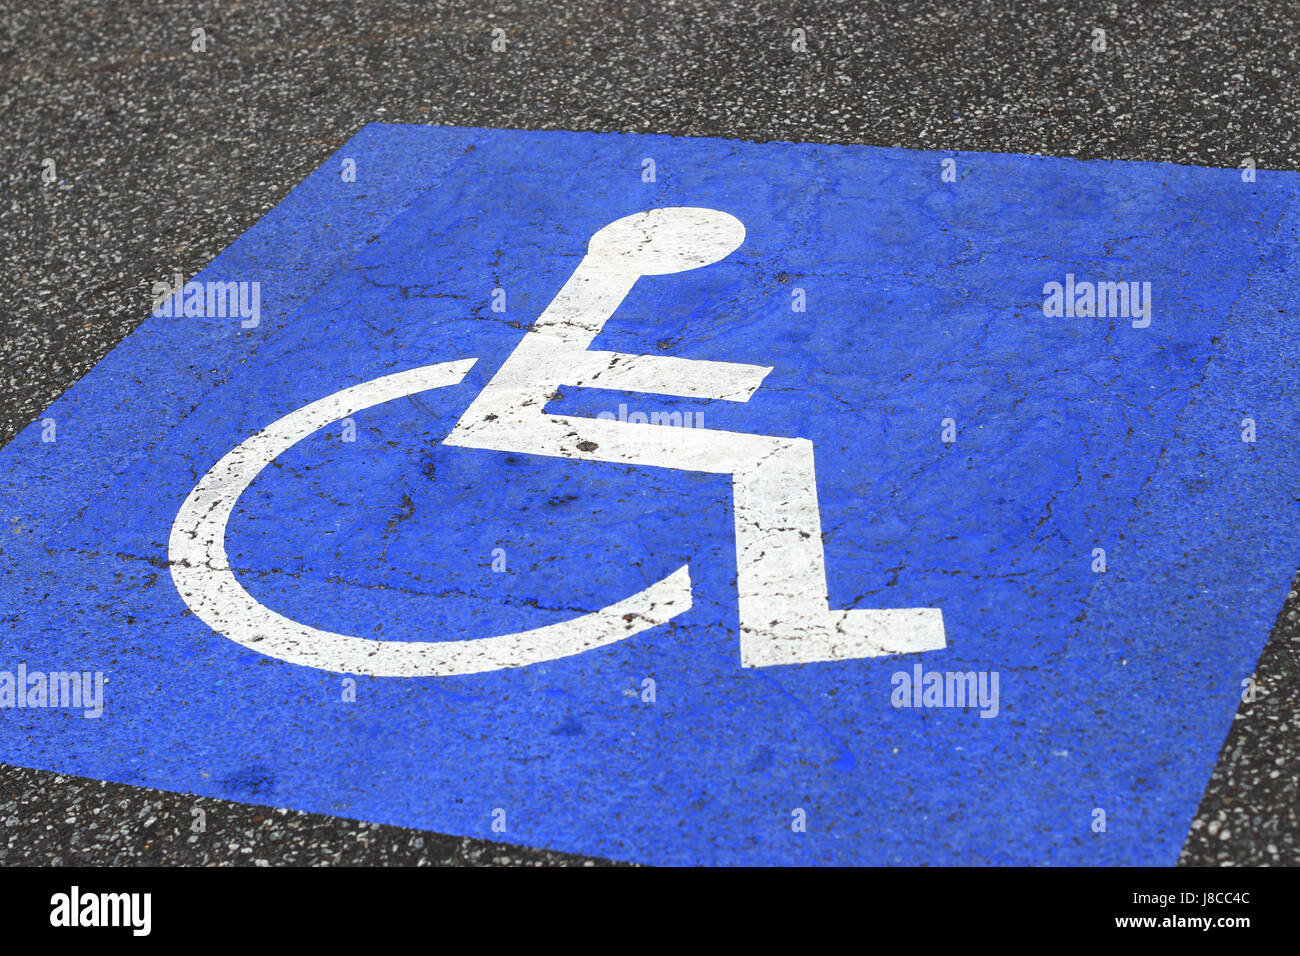 Painted Disable Parking sign on Asphalt Stock Photo